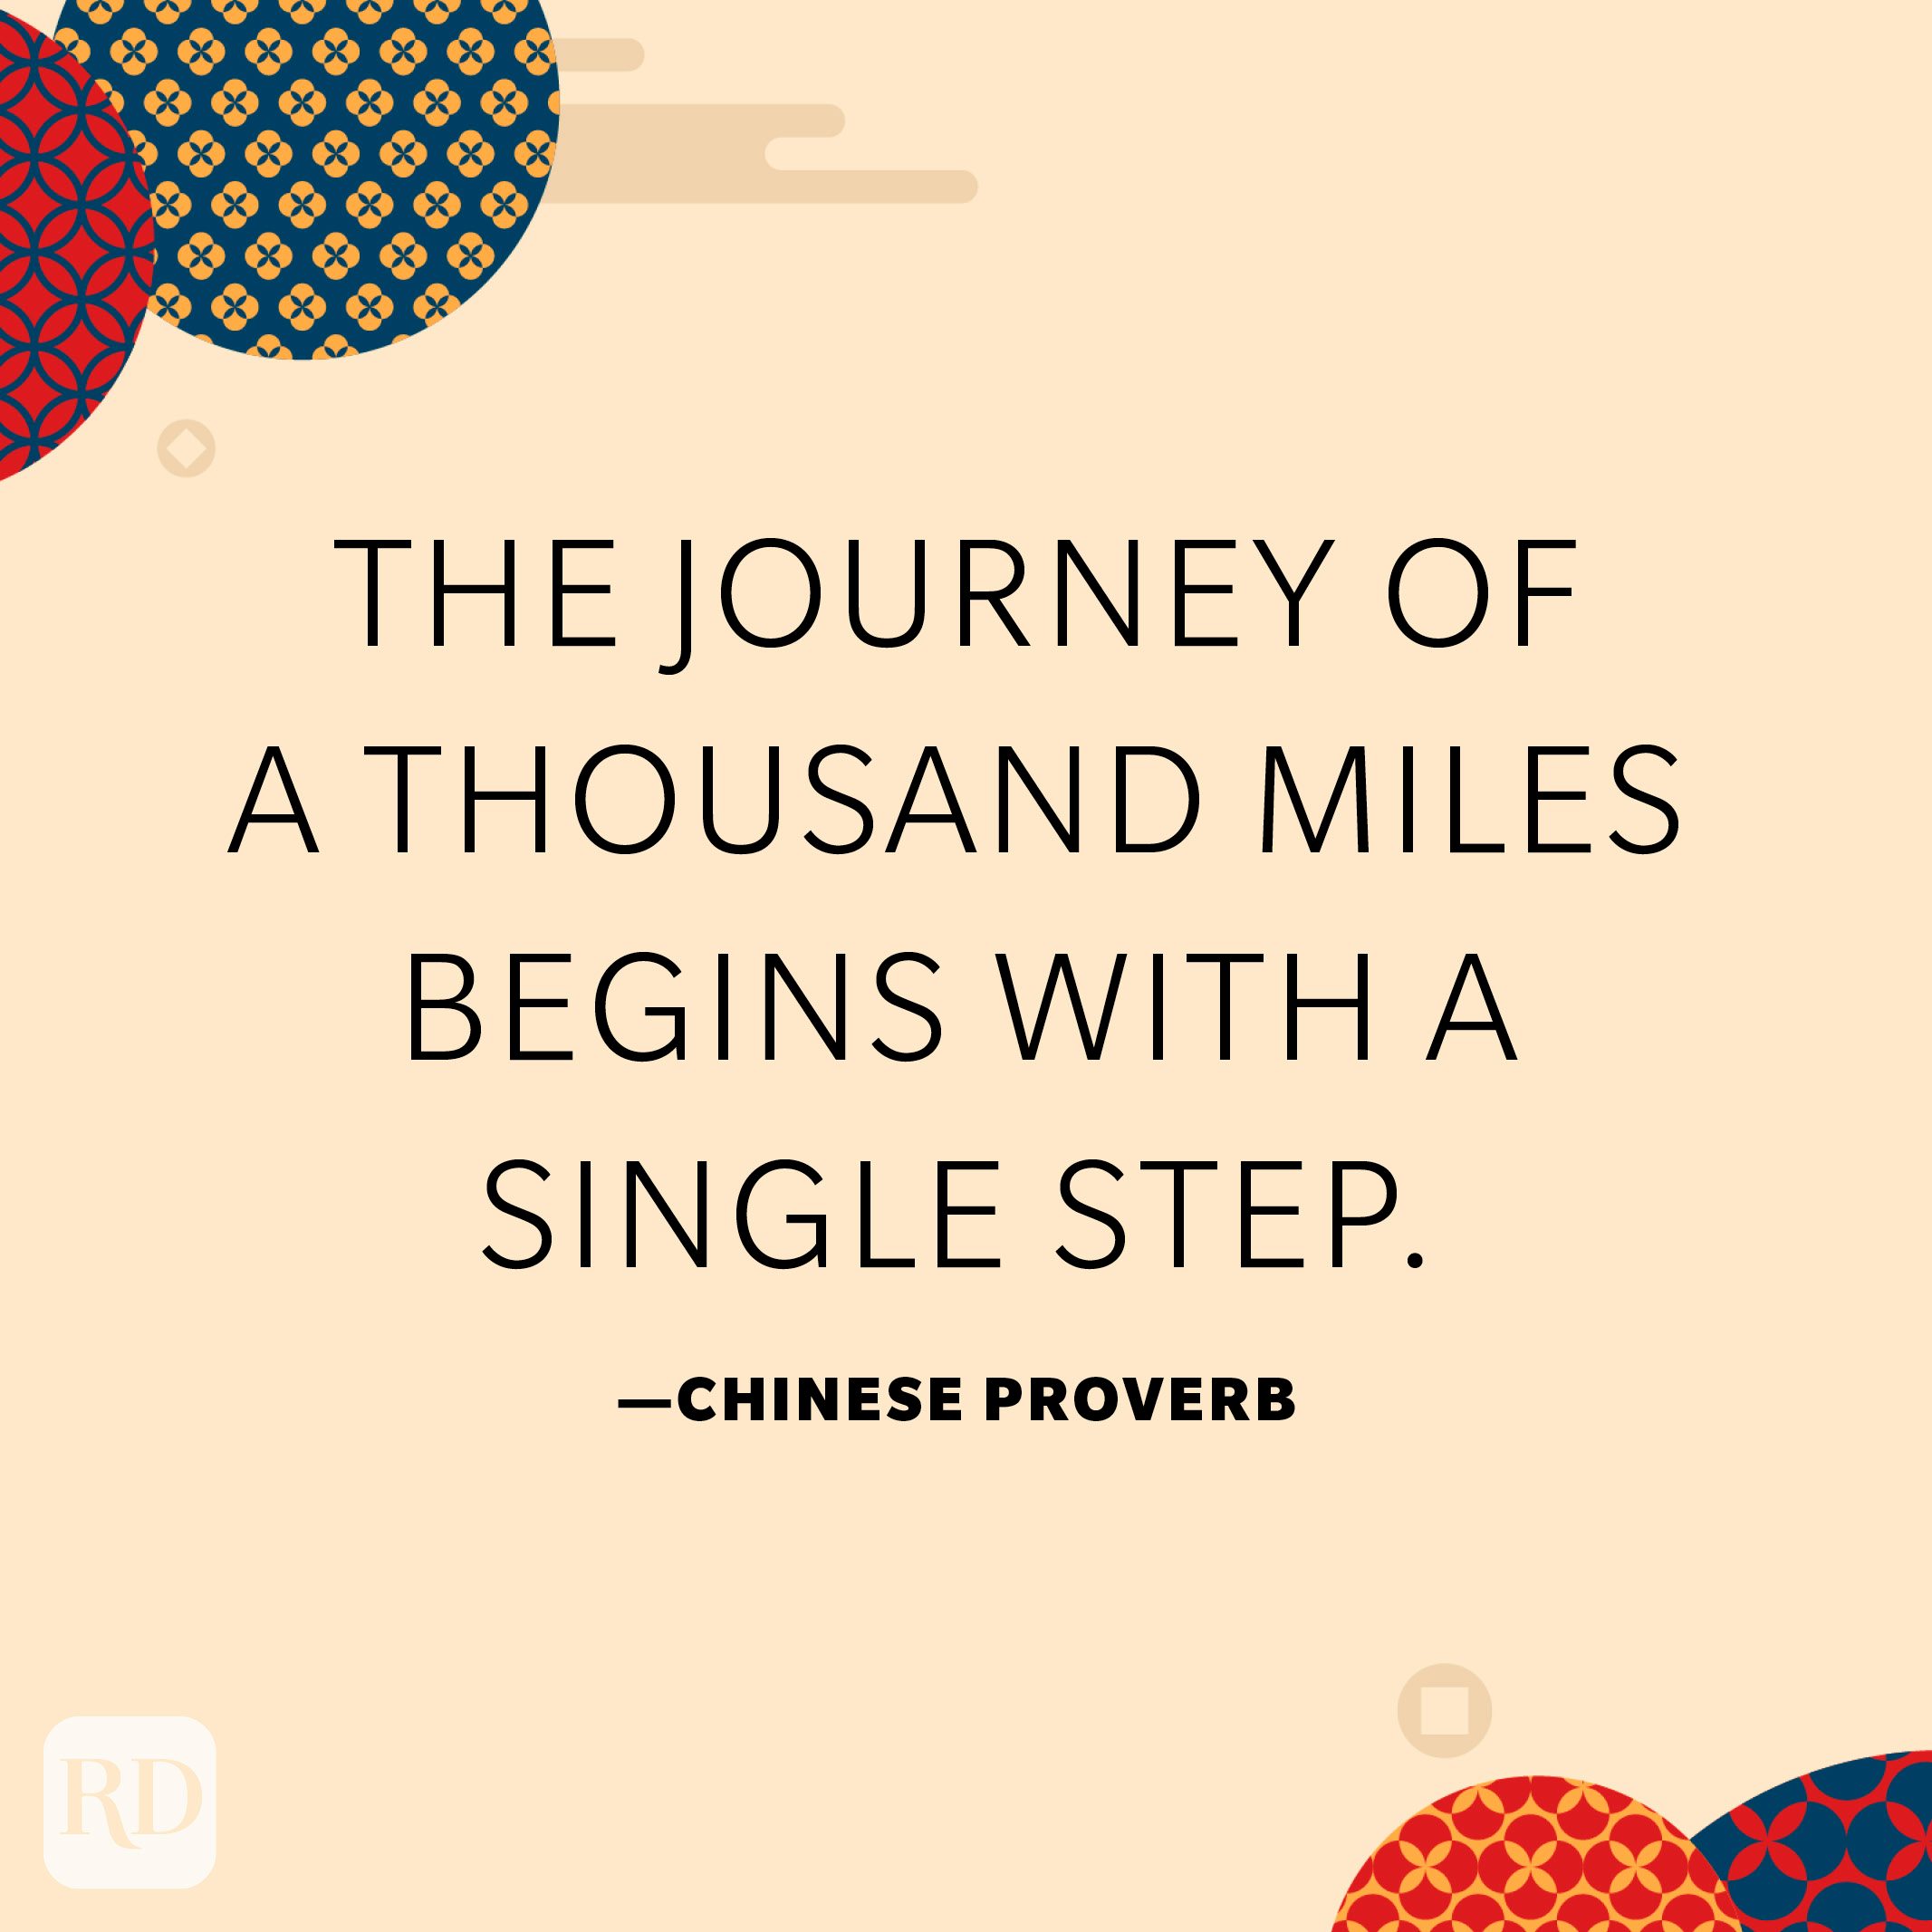 "The journey of a thousand miles begins with a single step."